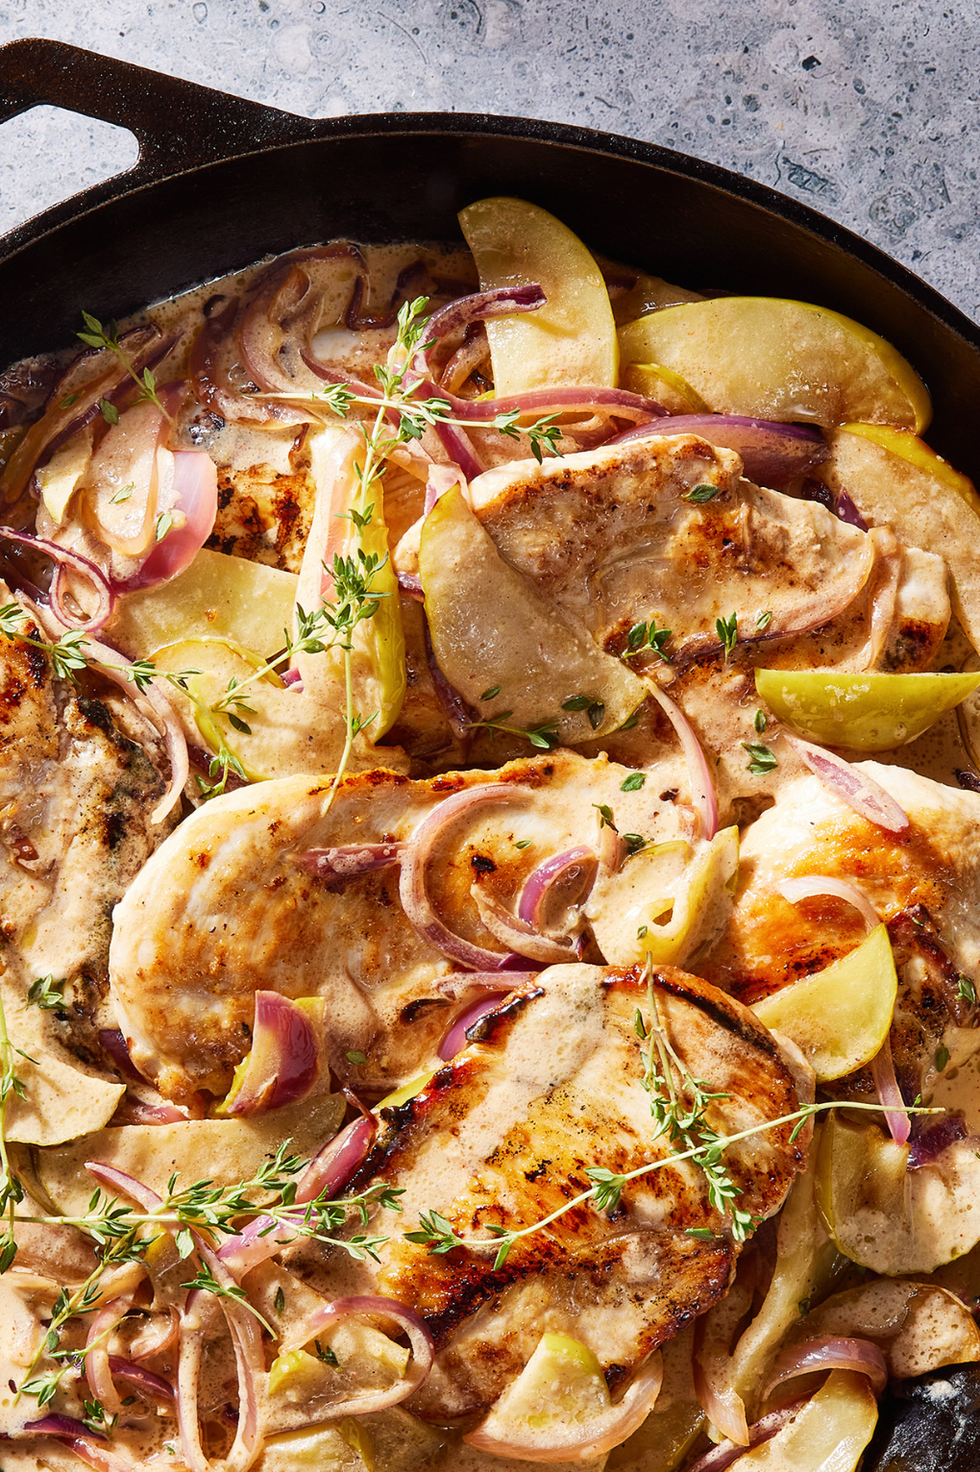 20 Best One-Pot Dinners - Easy One-Pot Recipes